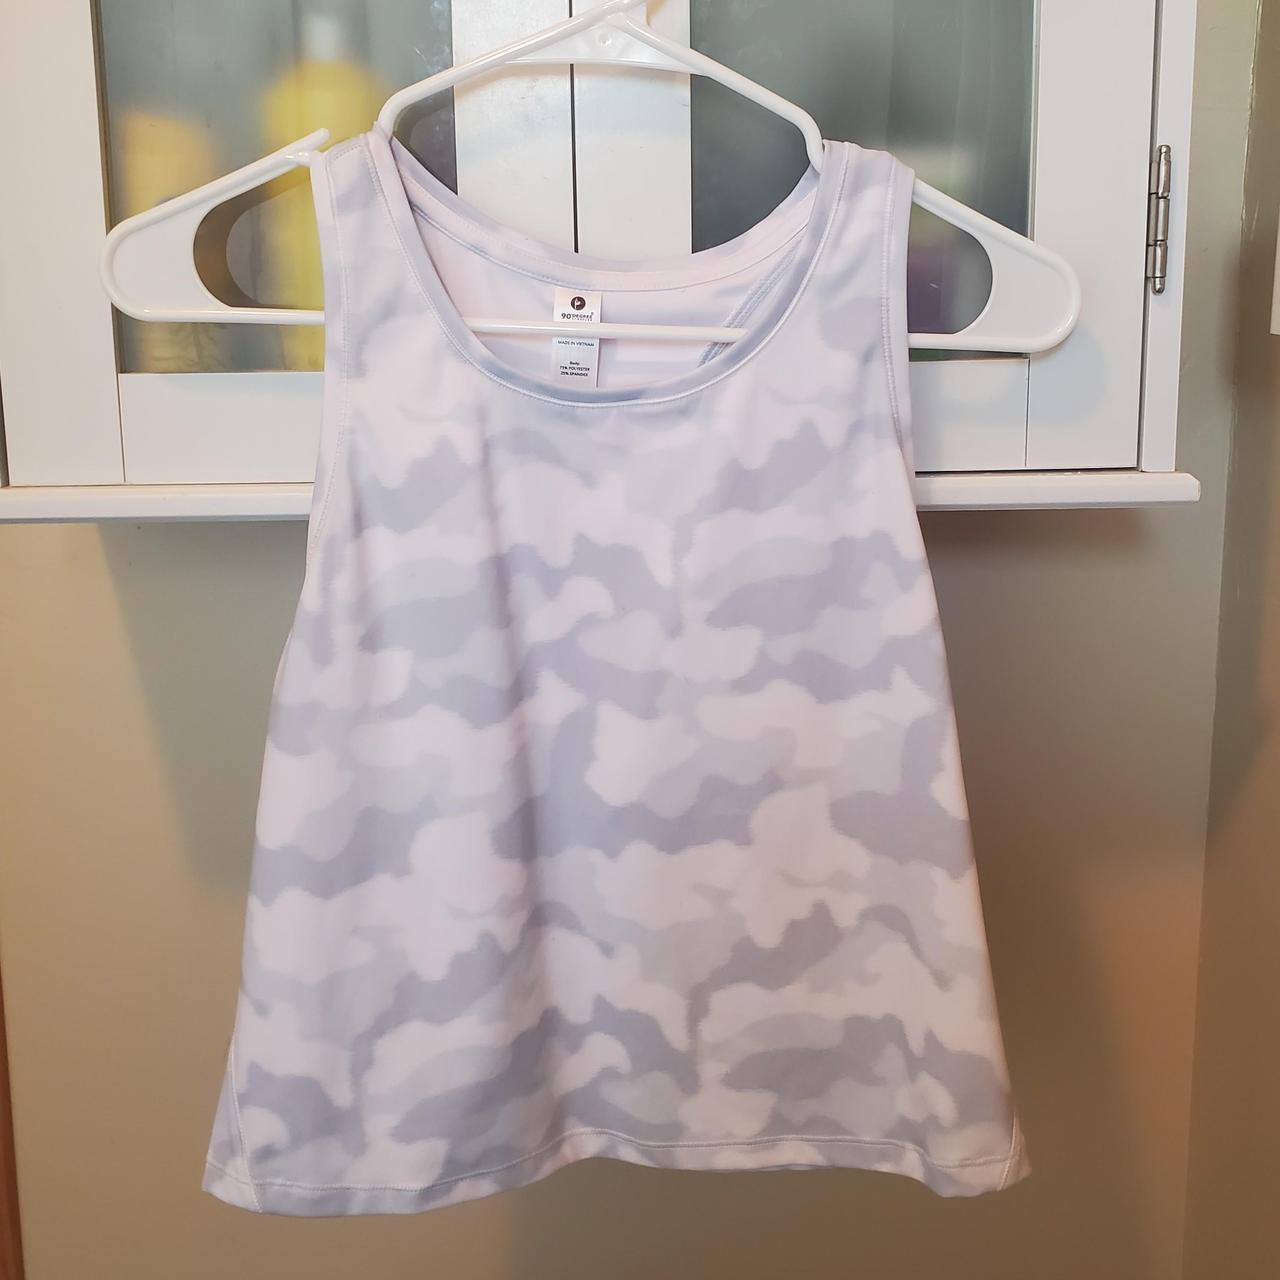 White and grey camo athletic top - Depop